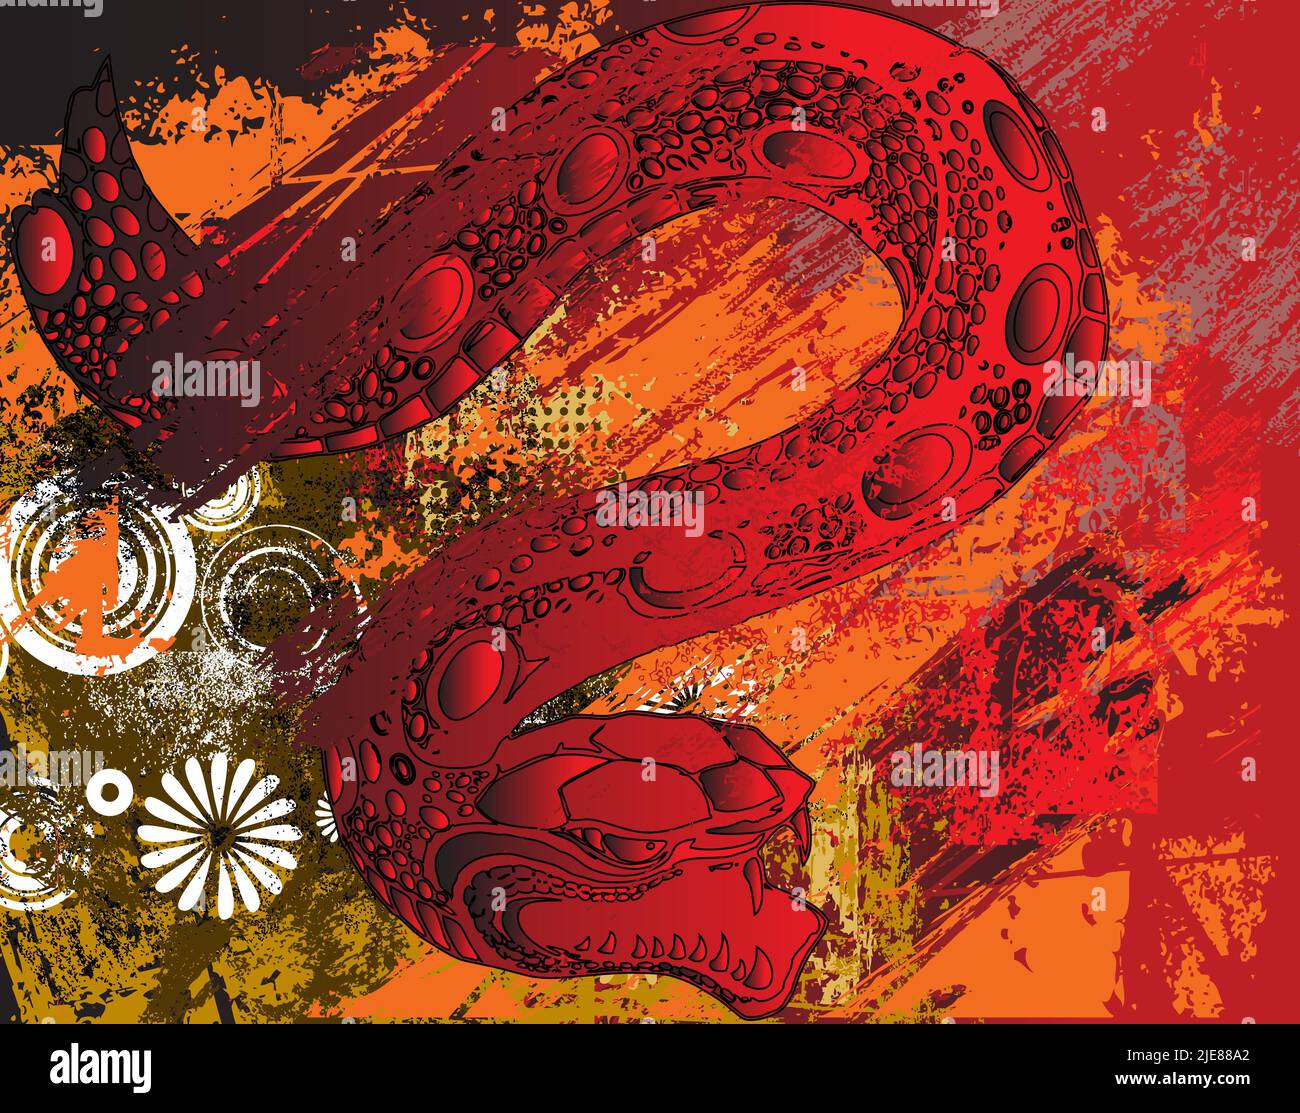 Snake attack on abstract background. Illustration art Stock Photo